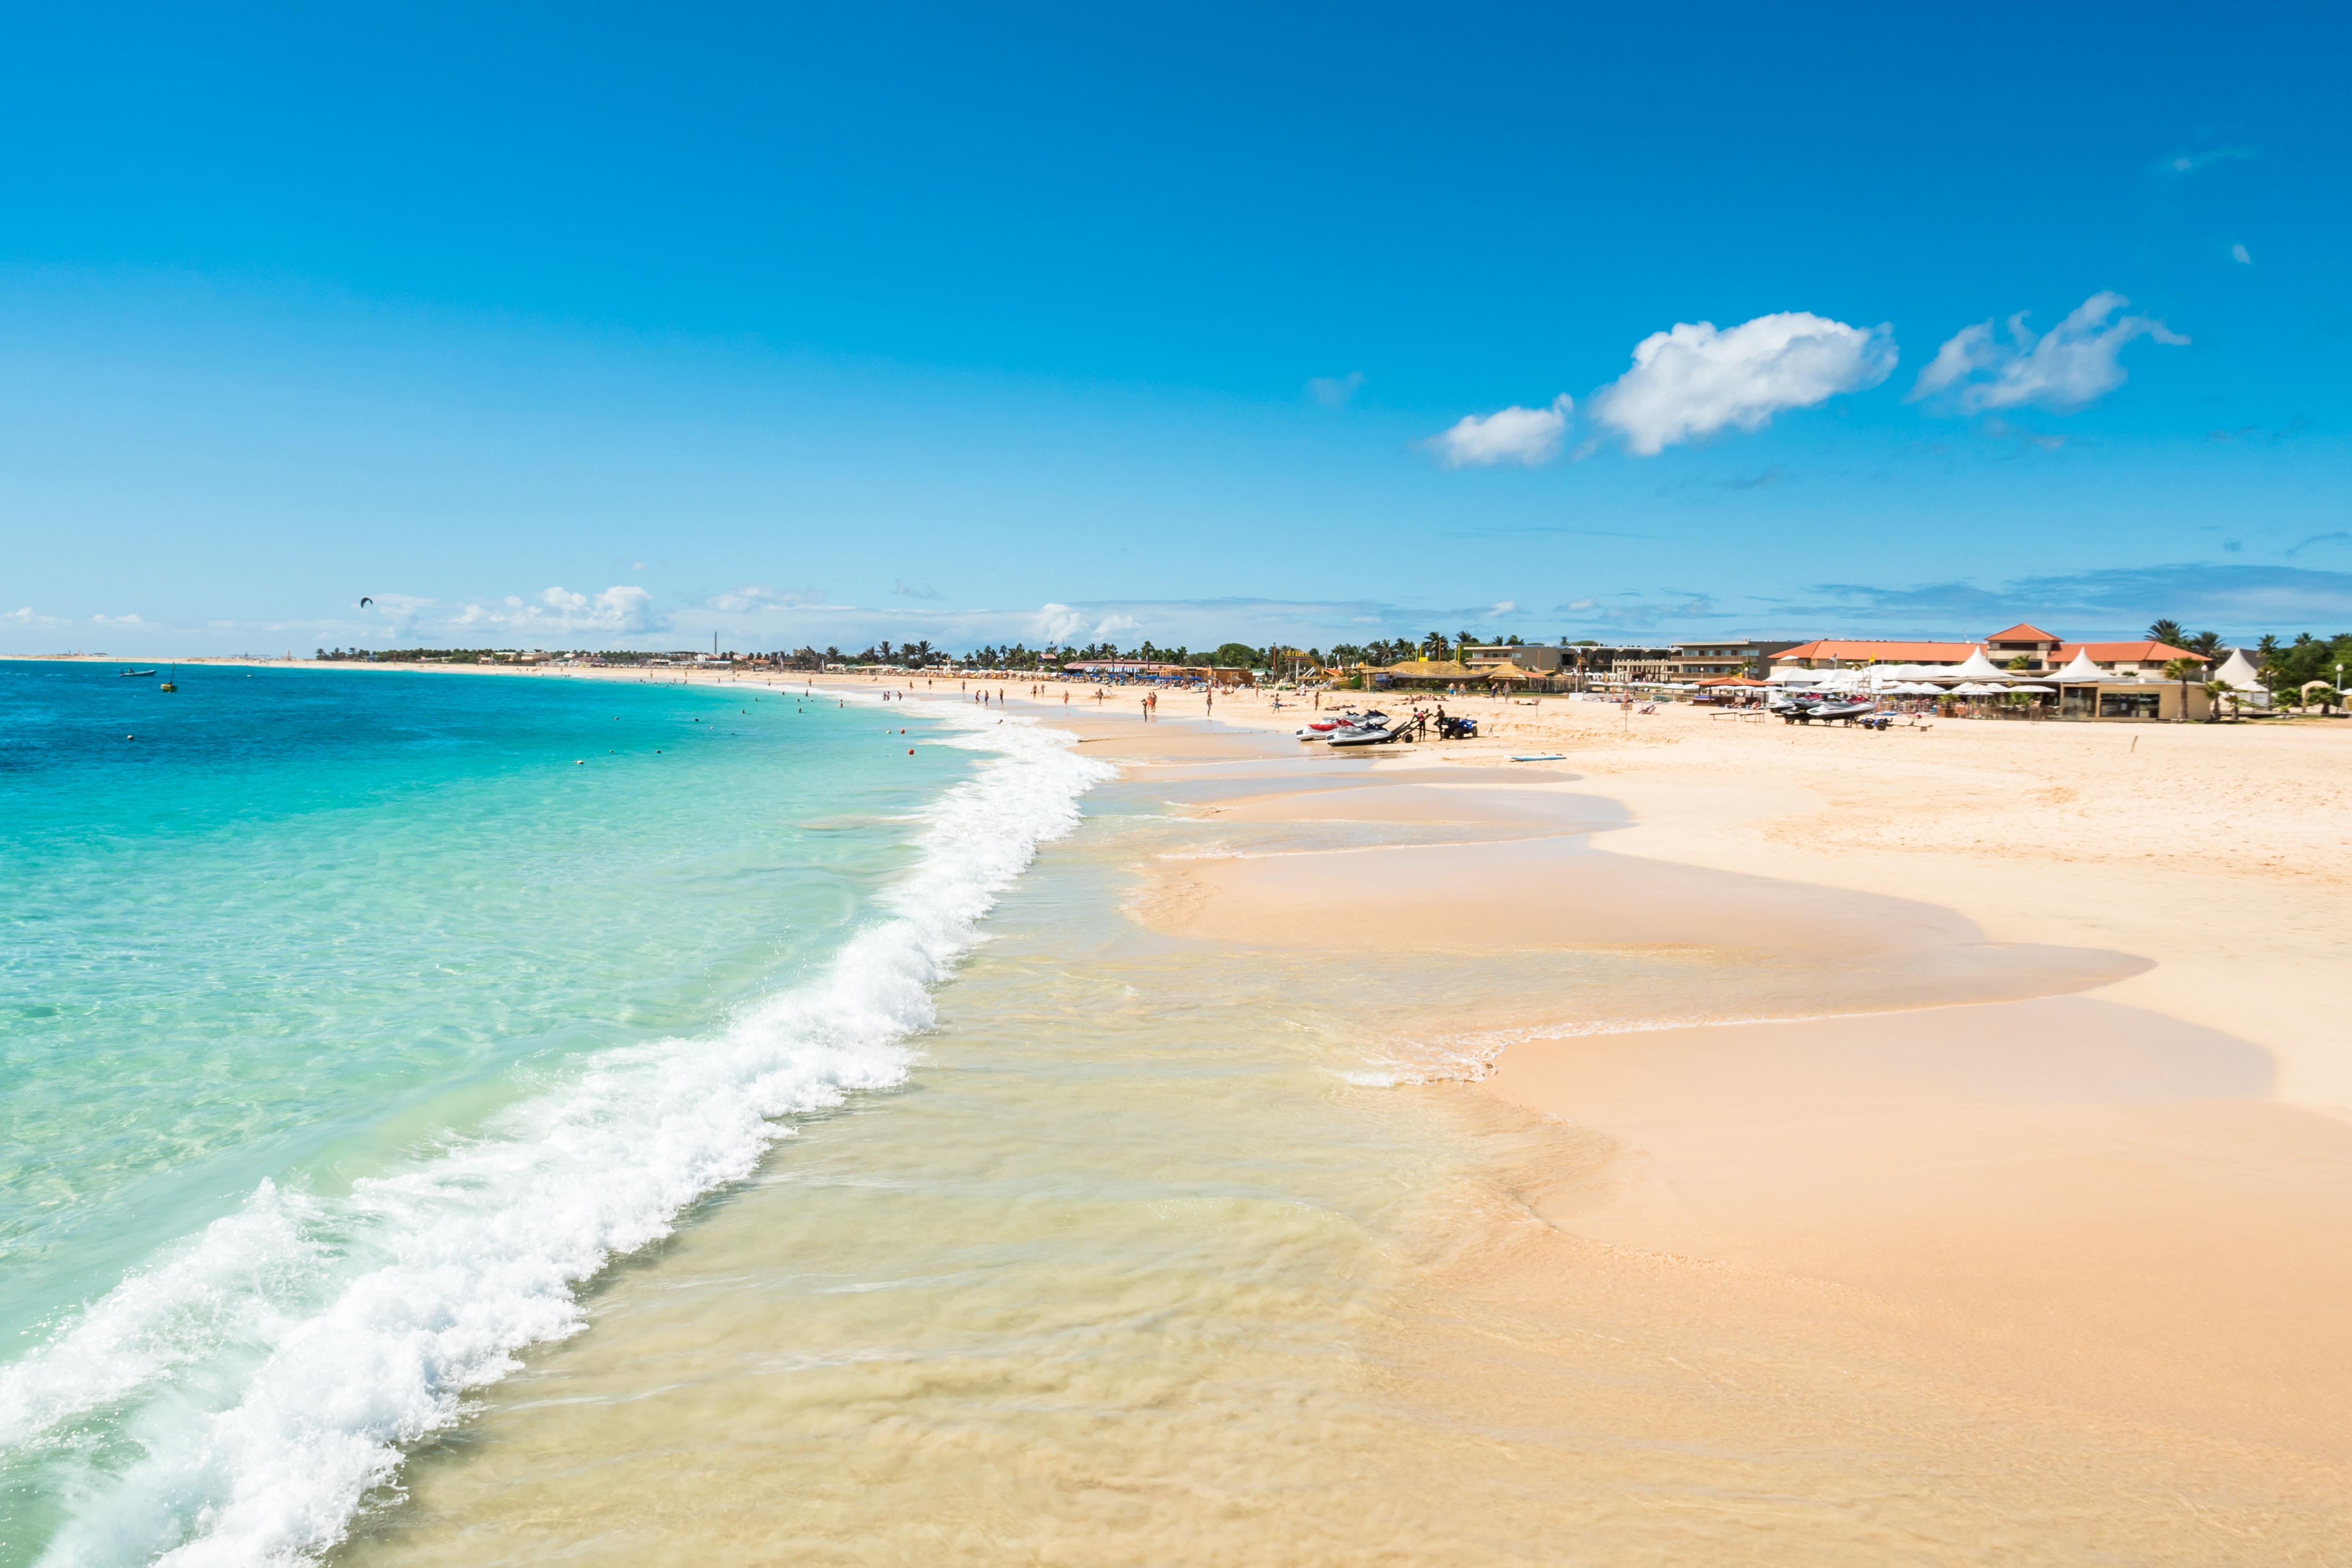 Cape Verde is the answer, with 28C highs and cheap all-inclusive deals all year round